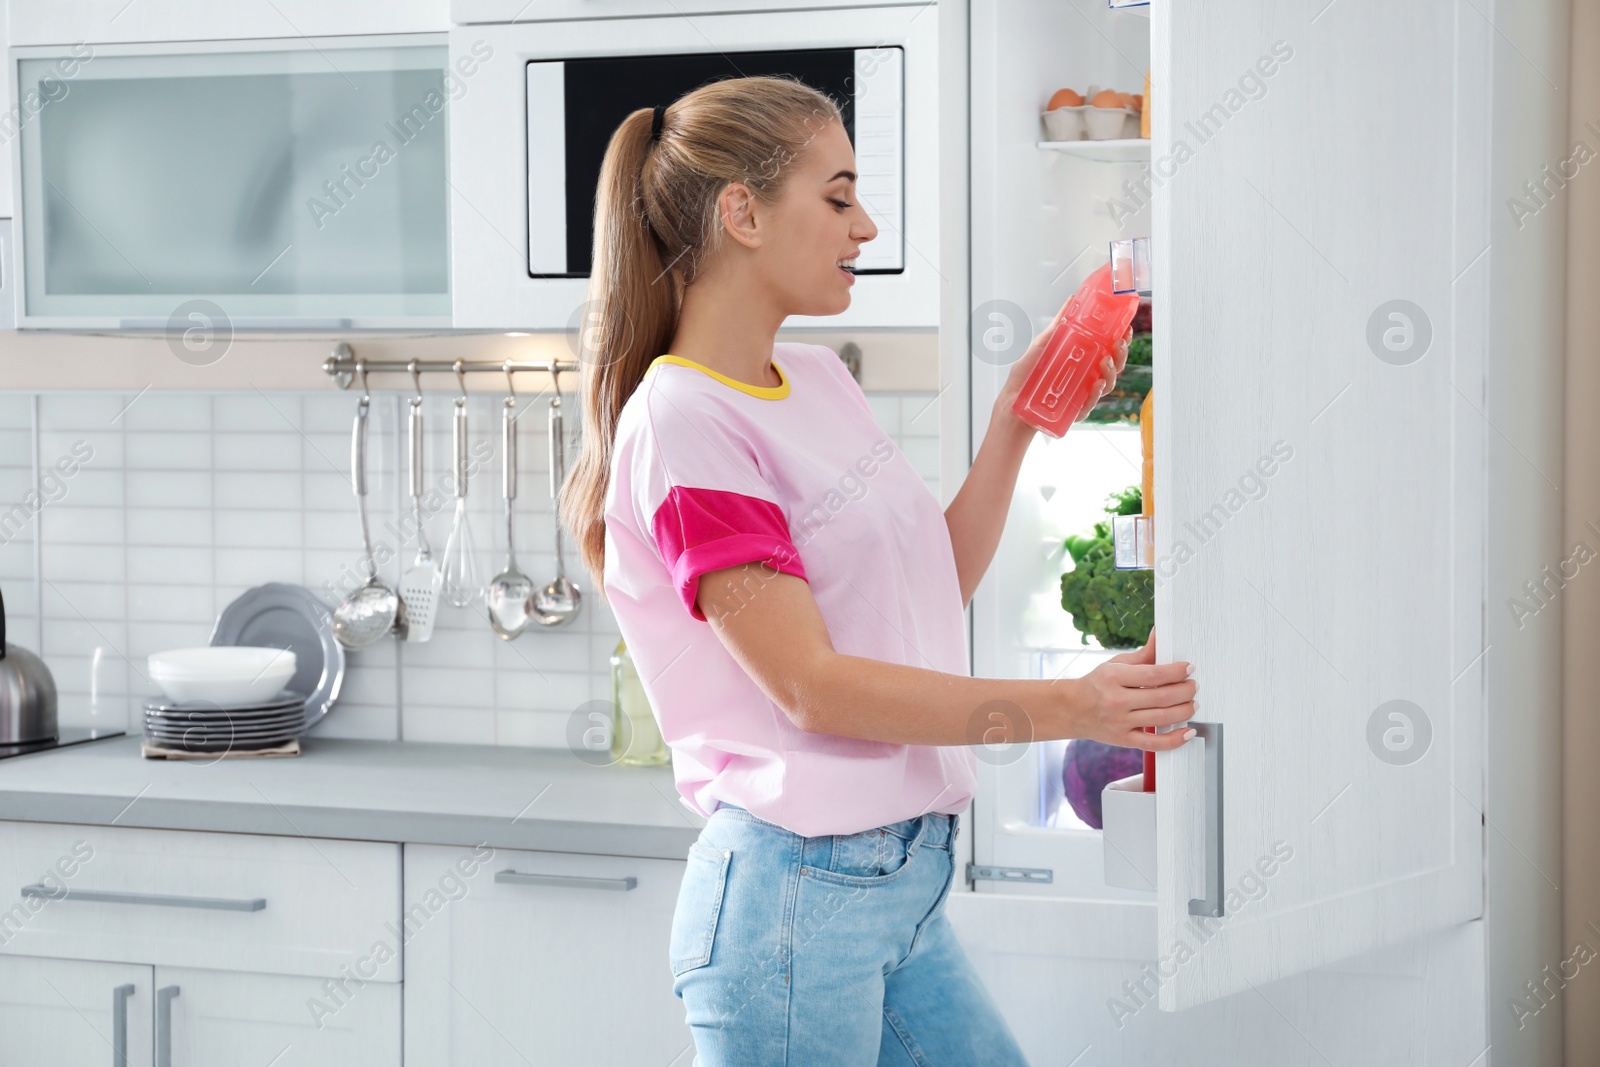 Photo of Woman taking bottle of juice out of refrigerator in kitchen